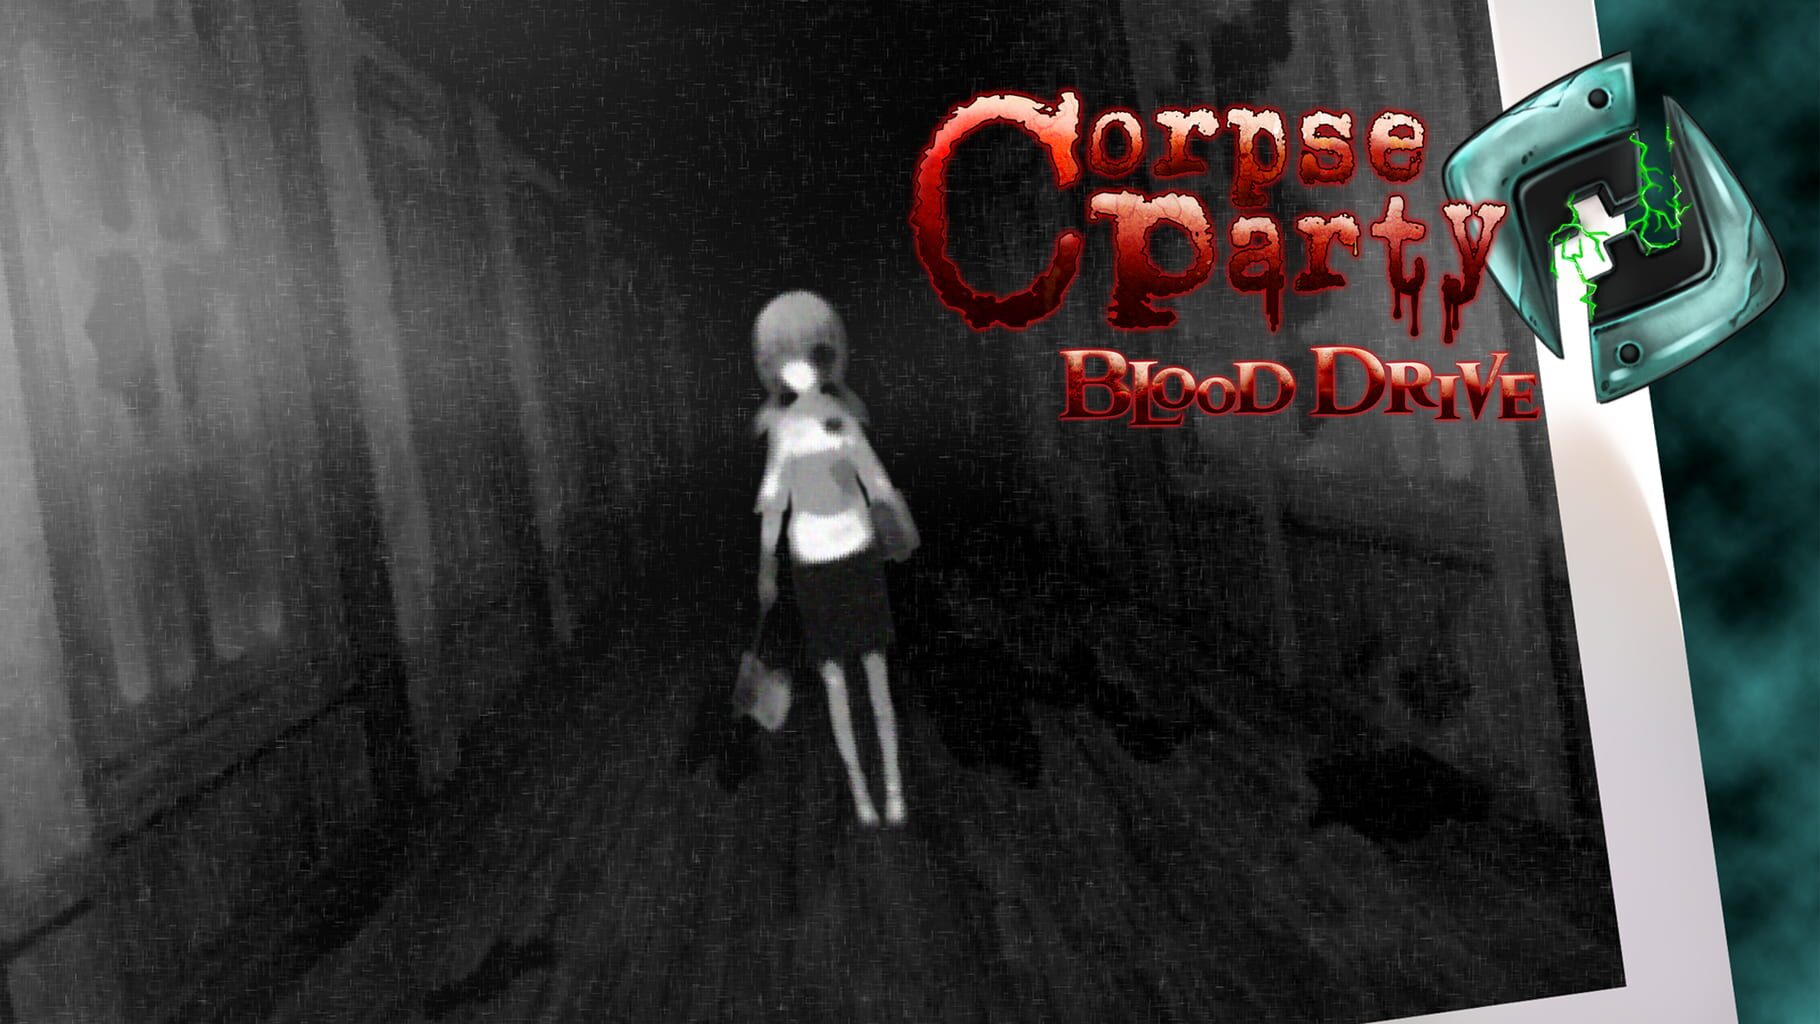 Corpse Party: Blood Drive artwork